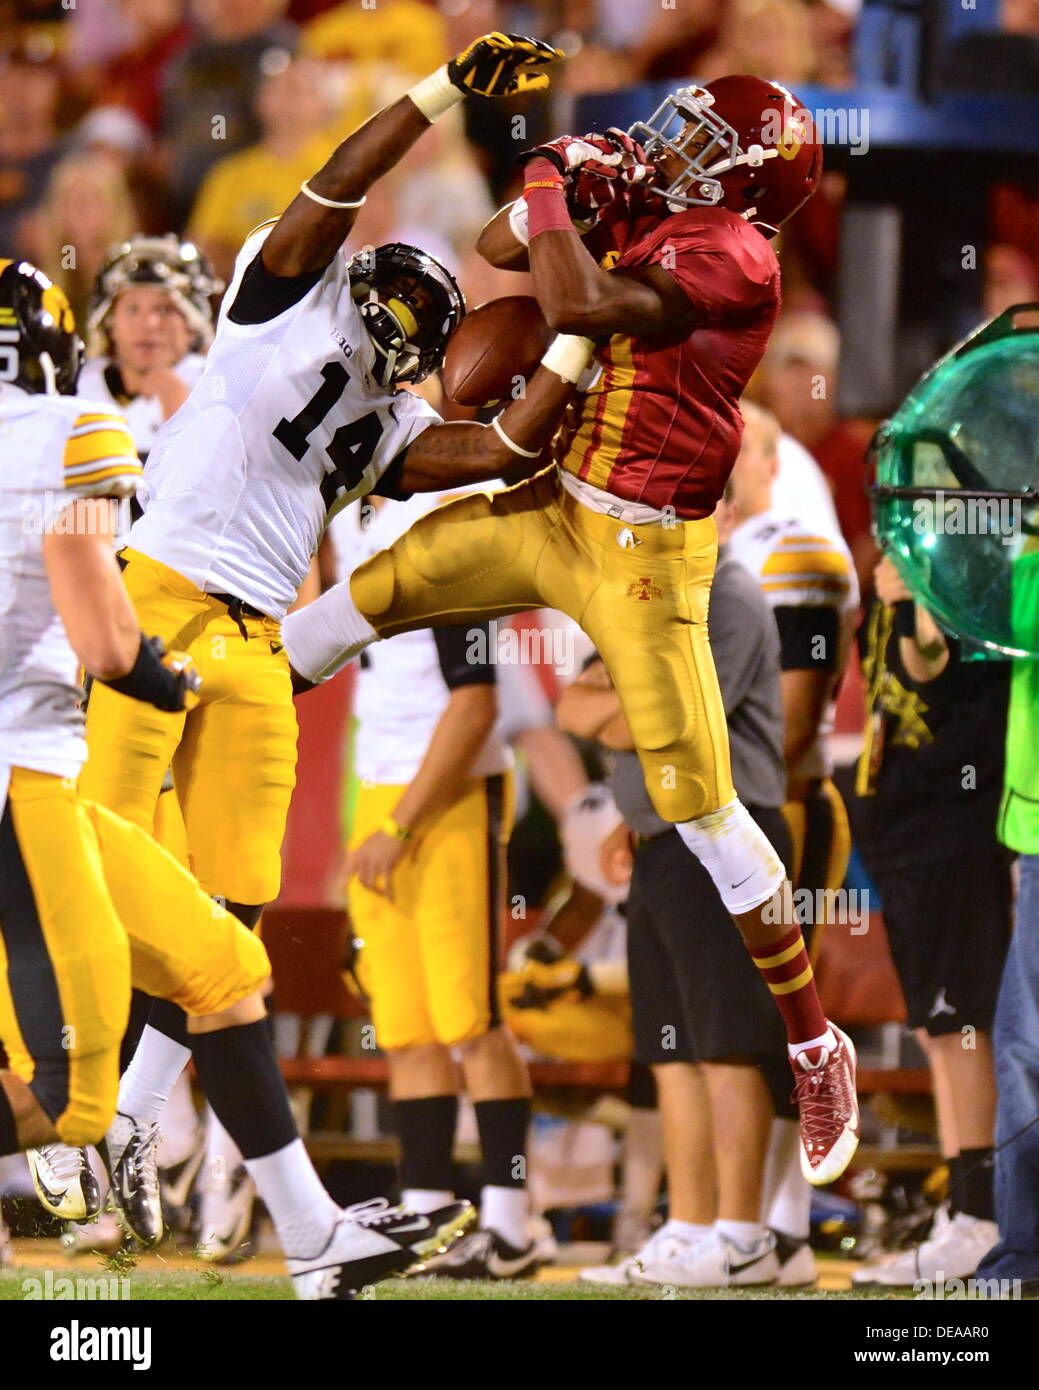 Sept. 14, 2013 - Ames, Iowa, United States of America - August 31st., 2013: Iowa DB #14 Desmond King breaking up a play on Iowa State WR #6 Tad Ecby during the NCAA football game between the Iowa State Cyclones and the Iowa Hawkeyes at Jack Trice Stadium in Ames, Iowa..Ke Lu/CSM Stock Photo